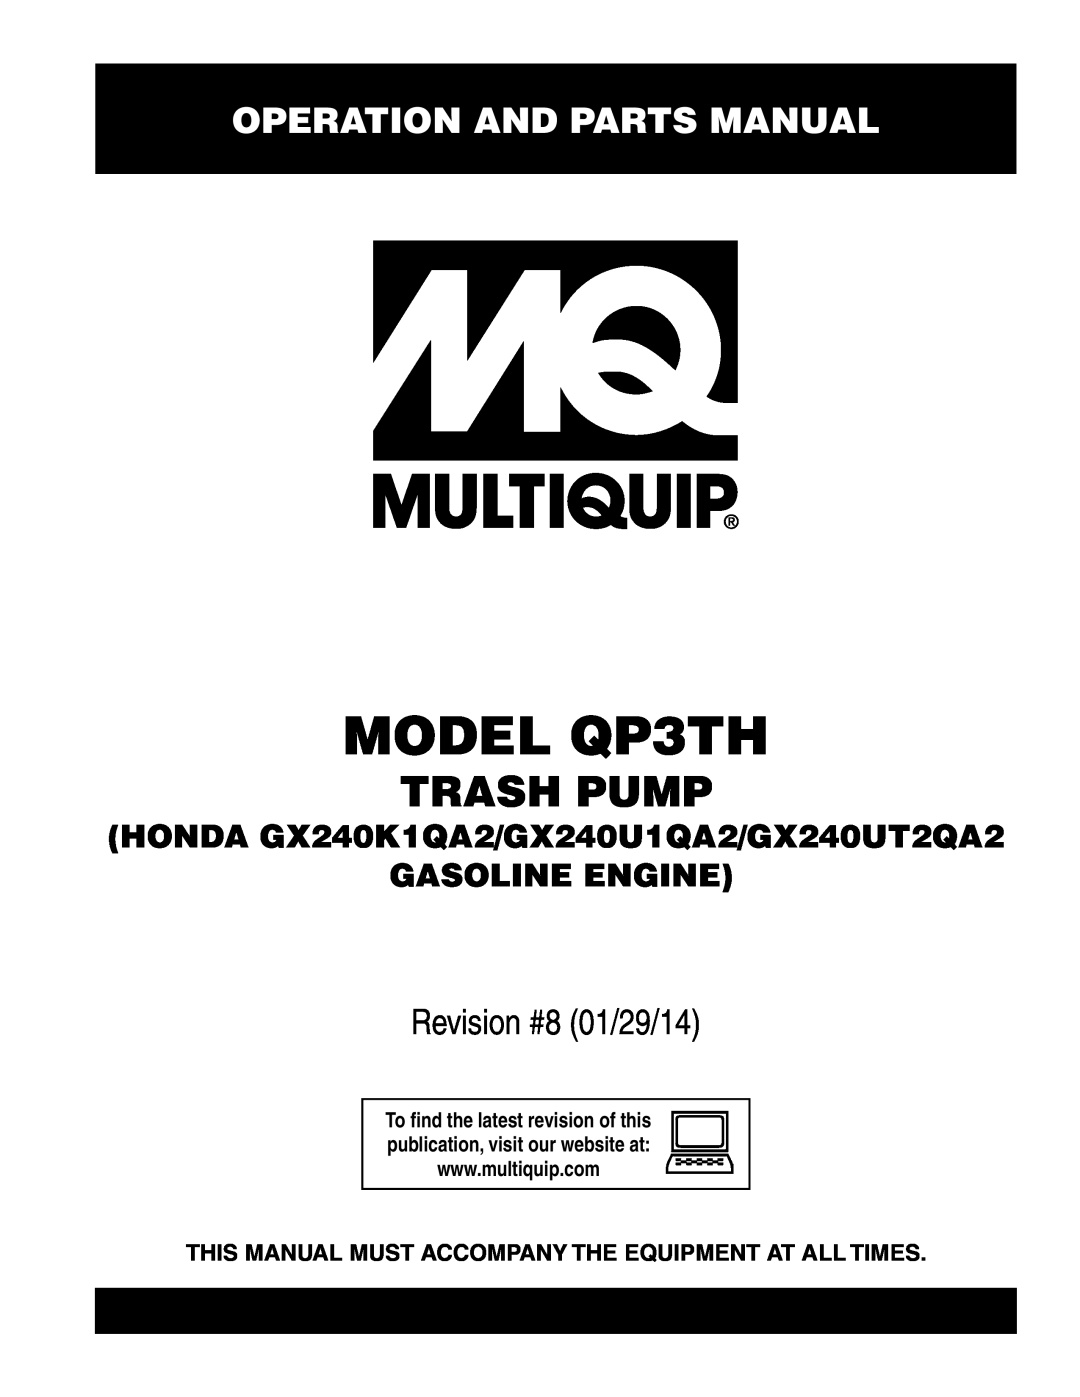 Multiquip manual Operation And Parts Manual, MODEL QP3TH, Trash Pump, Revision #8 01/29/14, Gasoline Engine 